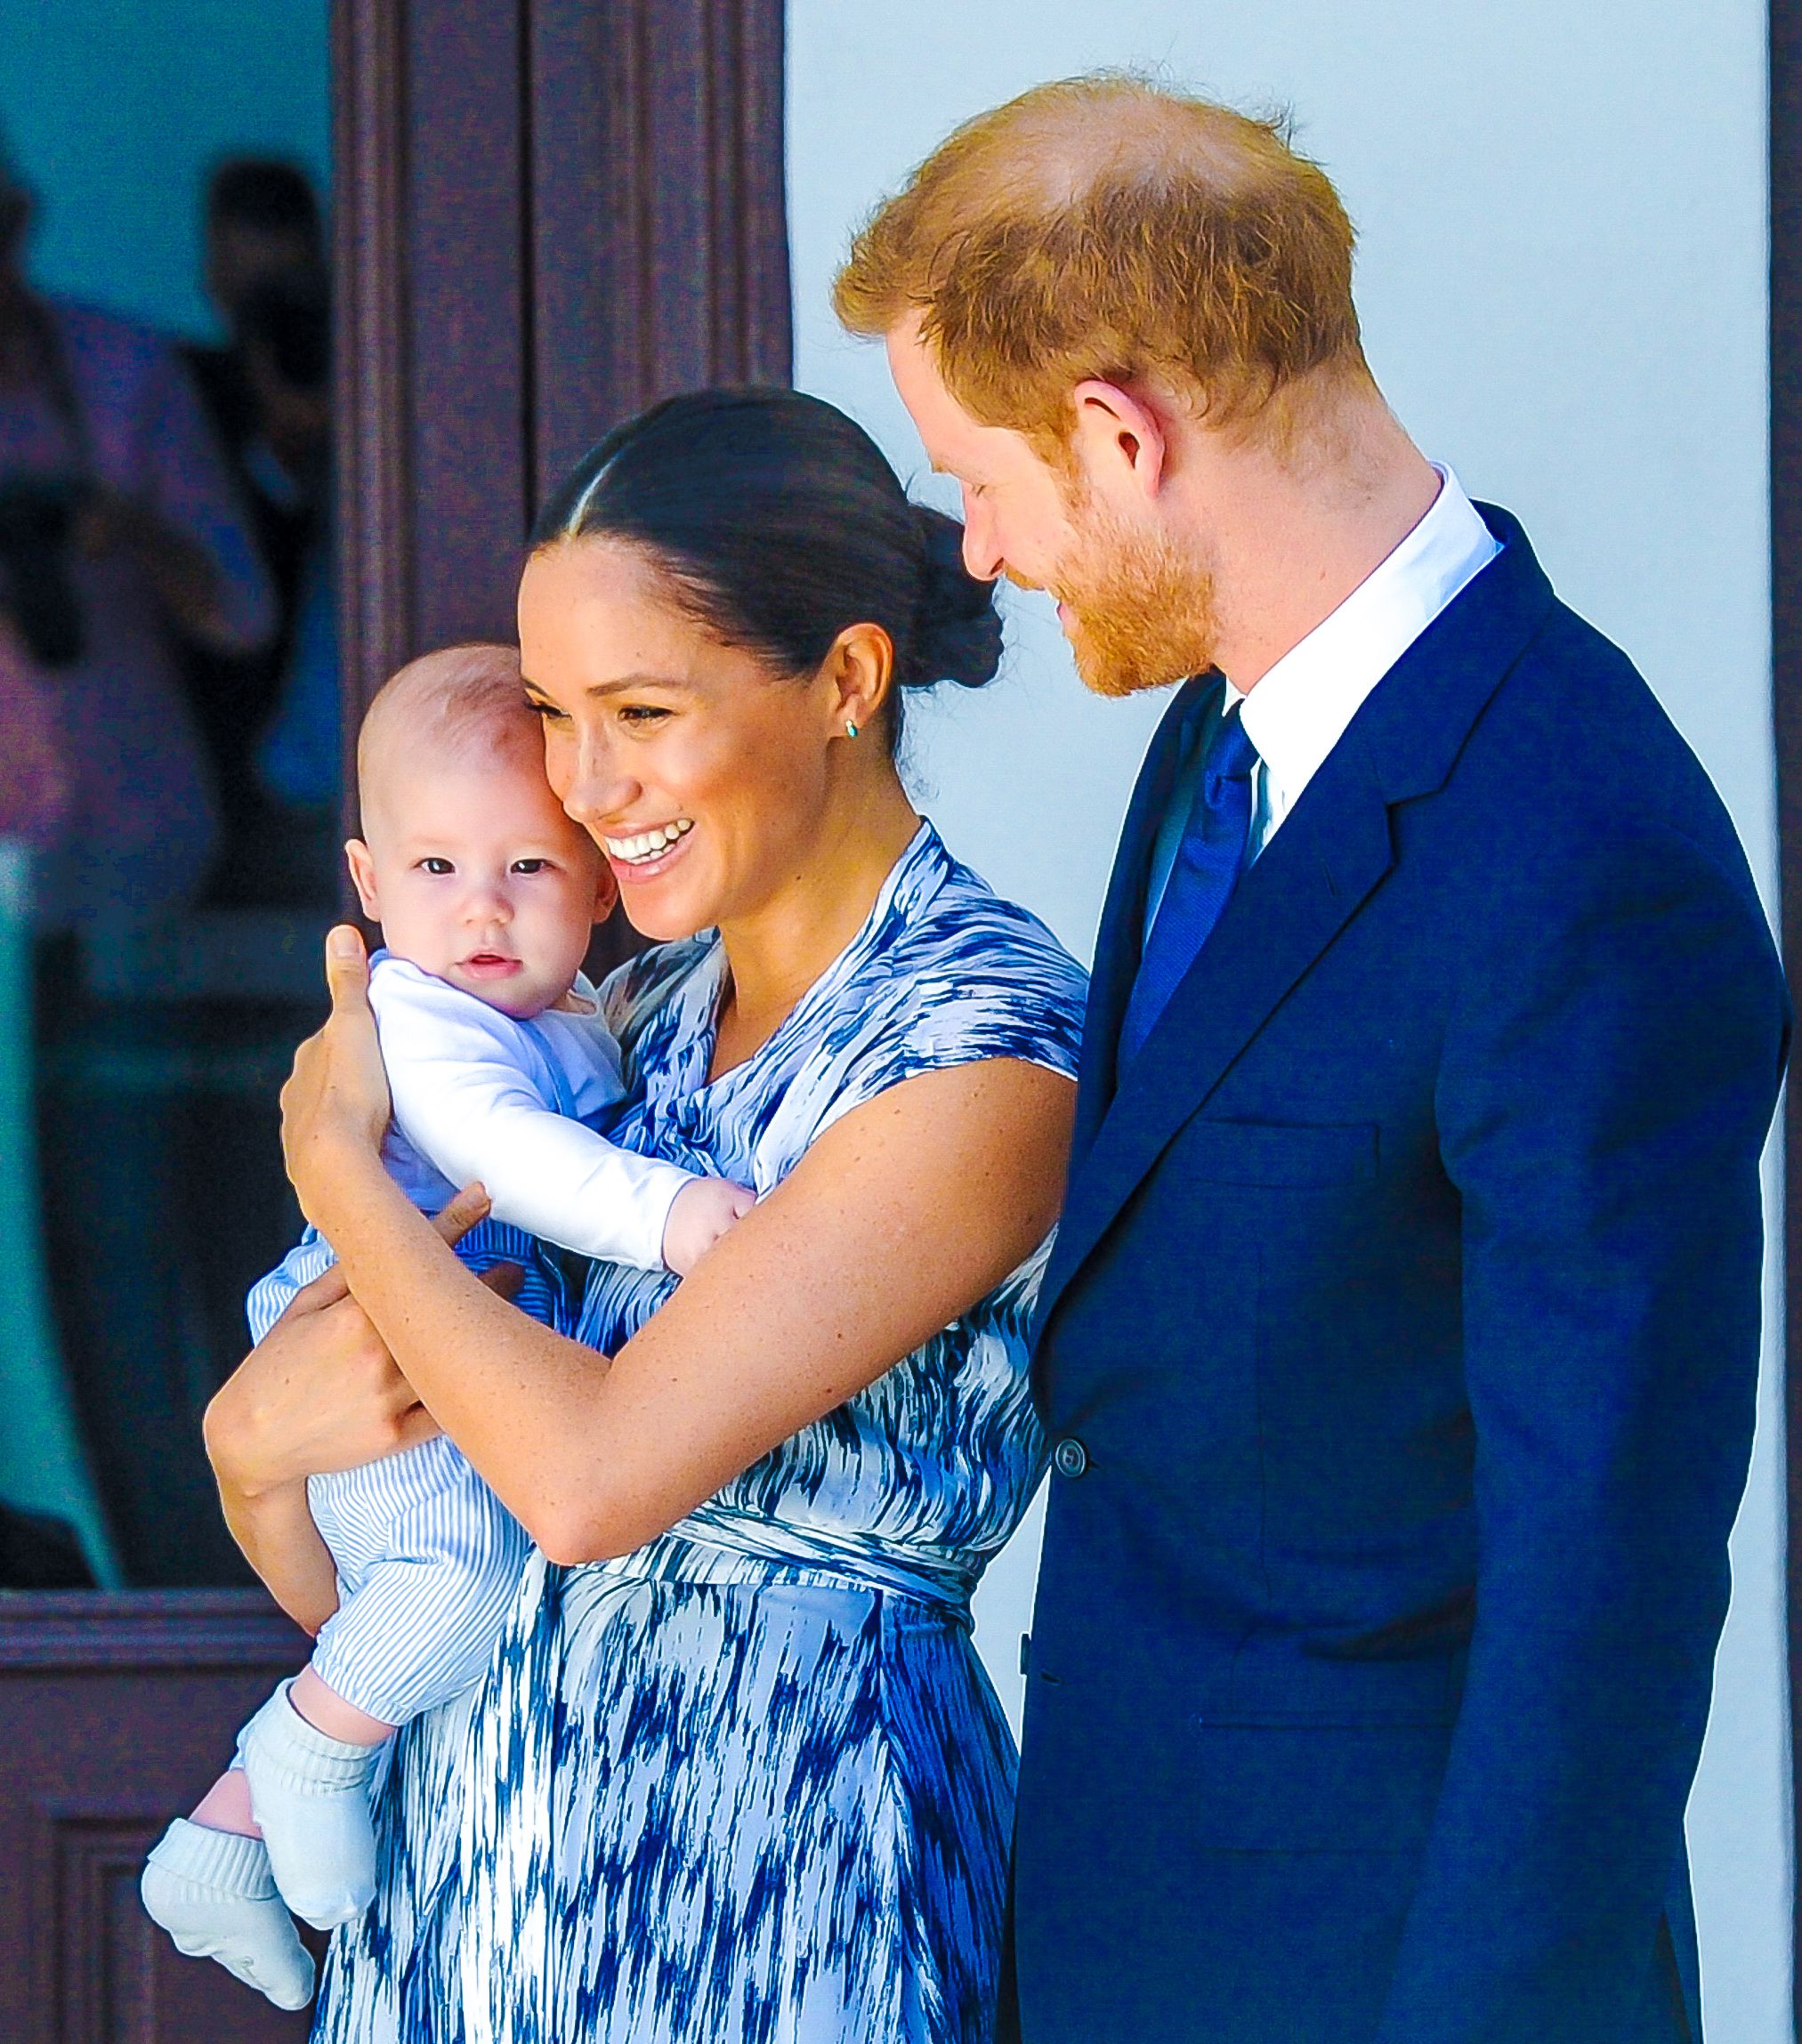 <p>Prince Harry and Duchess Meghan's <a href="https://www.wonderwall.com/news/duchess-meghan-markle-prince-harry-first-royal-baby-born-sussex-3019056.article">first-born child</a>, son <a href="https://www.wonderwall.com/celebrity/photos/prince-harry-and-duchess-meghan-debut-son-see-all-best-photos-baby-sussex-3019522.gallery">Archie Harrison Mountbatten-Windsor</a> -- who arrived in May 2019 -- is sixth in line to the throne of the United Kingdom of Great Britain and Northern Ireland. Though he was not given a royal title at birth and was instead styled as Master Archie Mountbatten-Windsor, technically, in September 2022 -- when his grandfather King Charles III became sovereign -- he automatically became Prince Archie, a title Buckingham palace finally acknowledged six months later.</p><p>Keep reading for an explanation on the title change...</p>